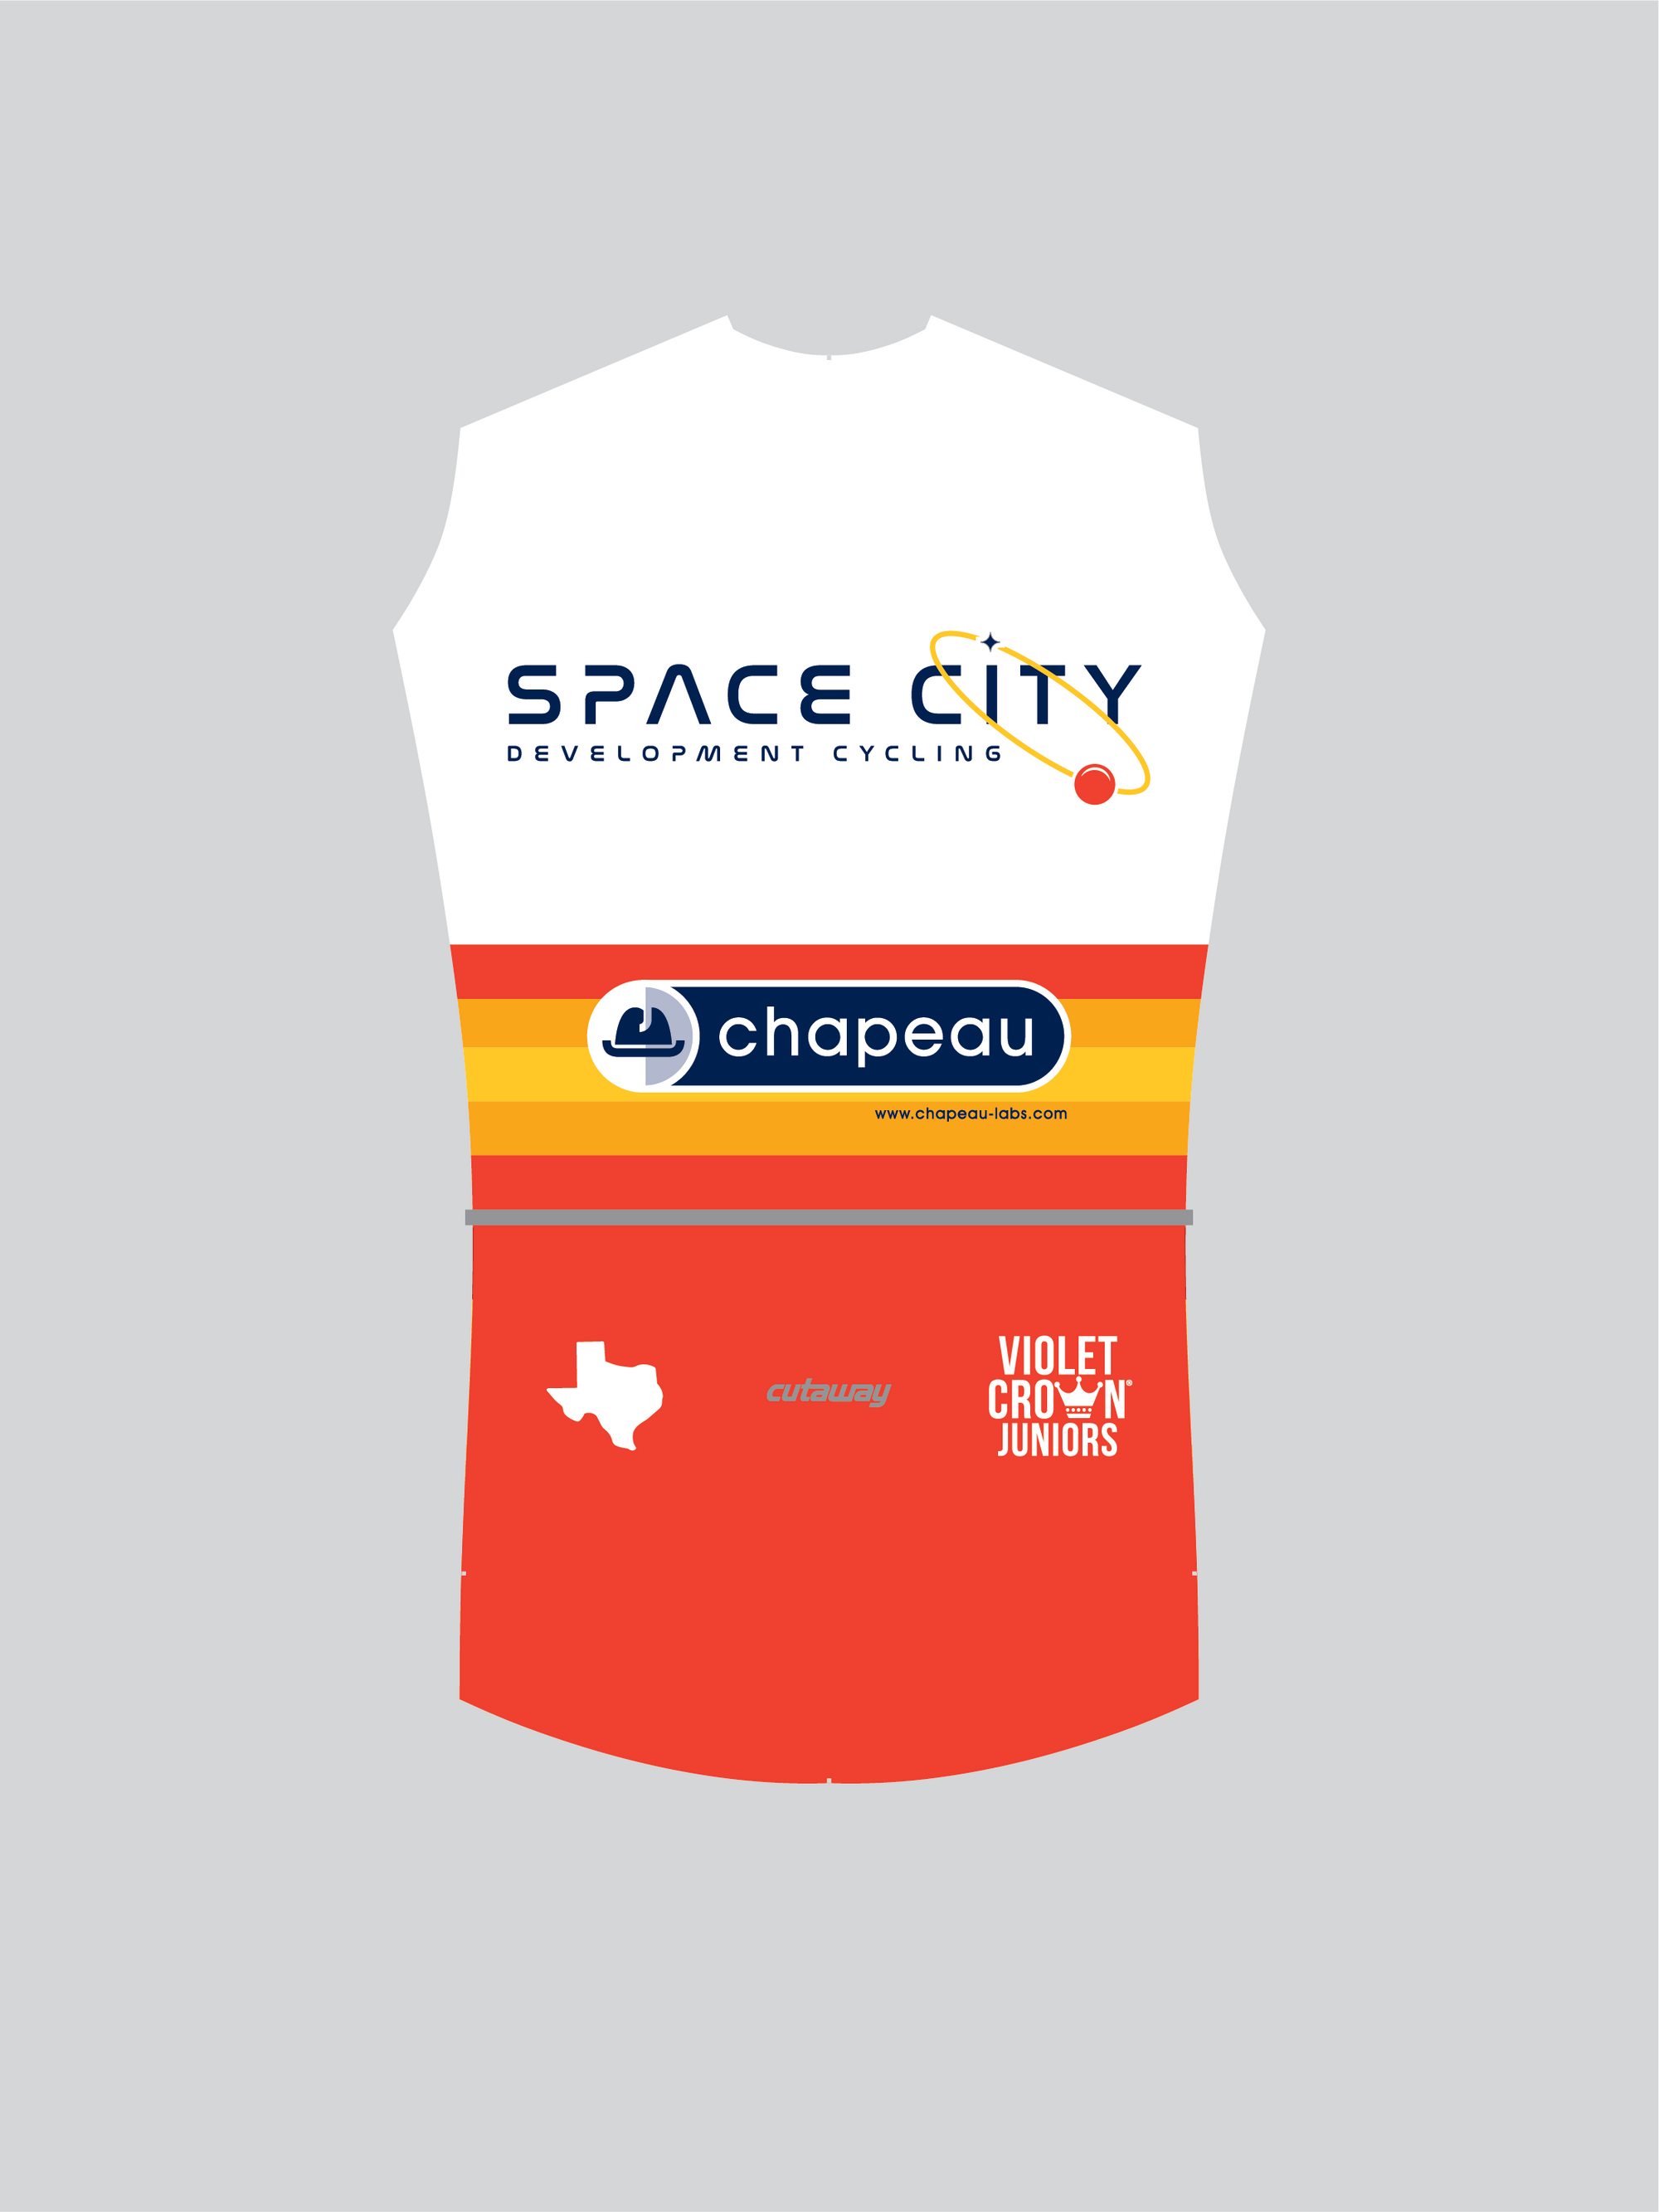 astros cycling jersey